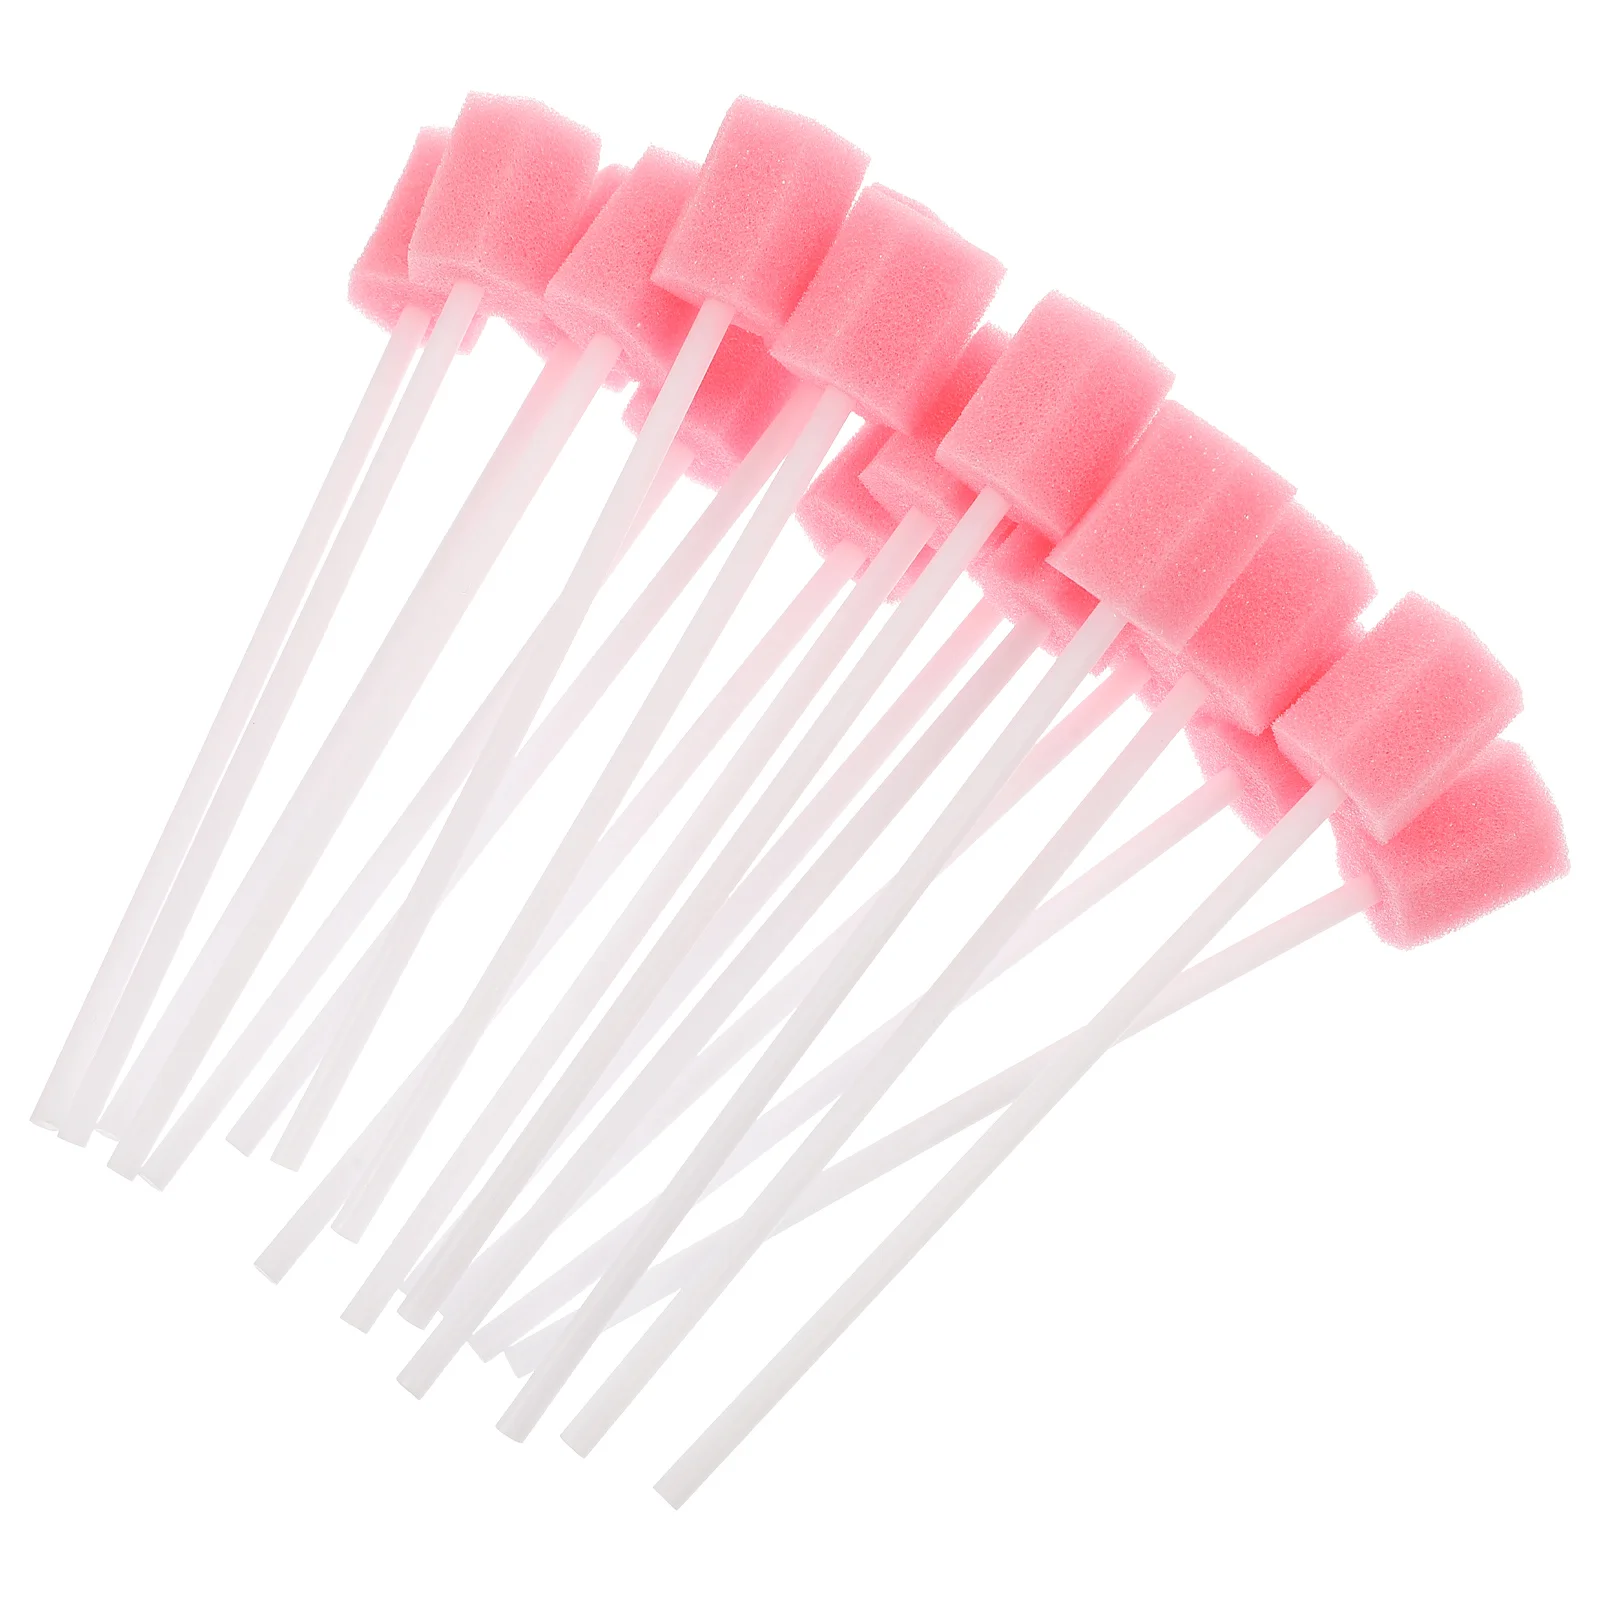 

100 Pcs Mouth Cleansing Sponge Make Dental Swabs Accessories Multi-function Cavity Pp Accessory Oral Cleaning